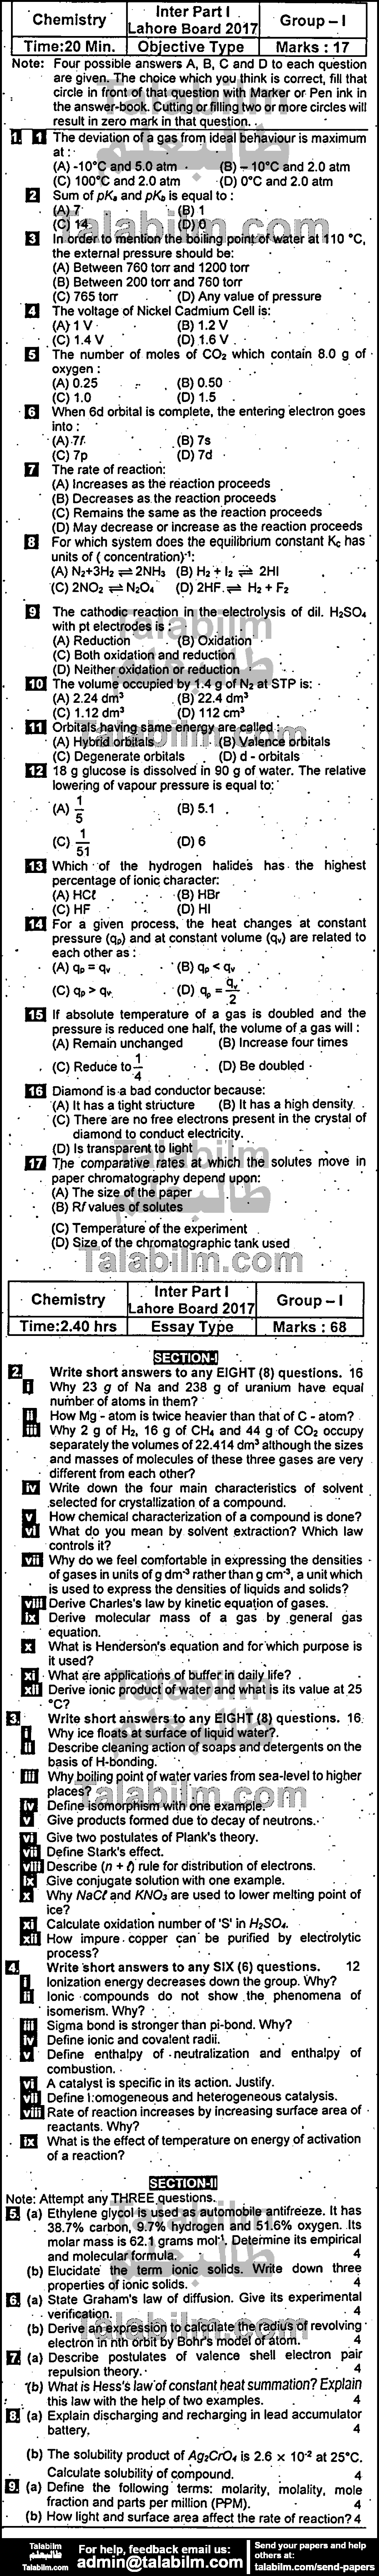 Chemistry 0 past paper for Group-I 2017